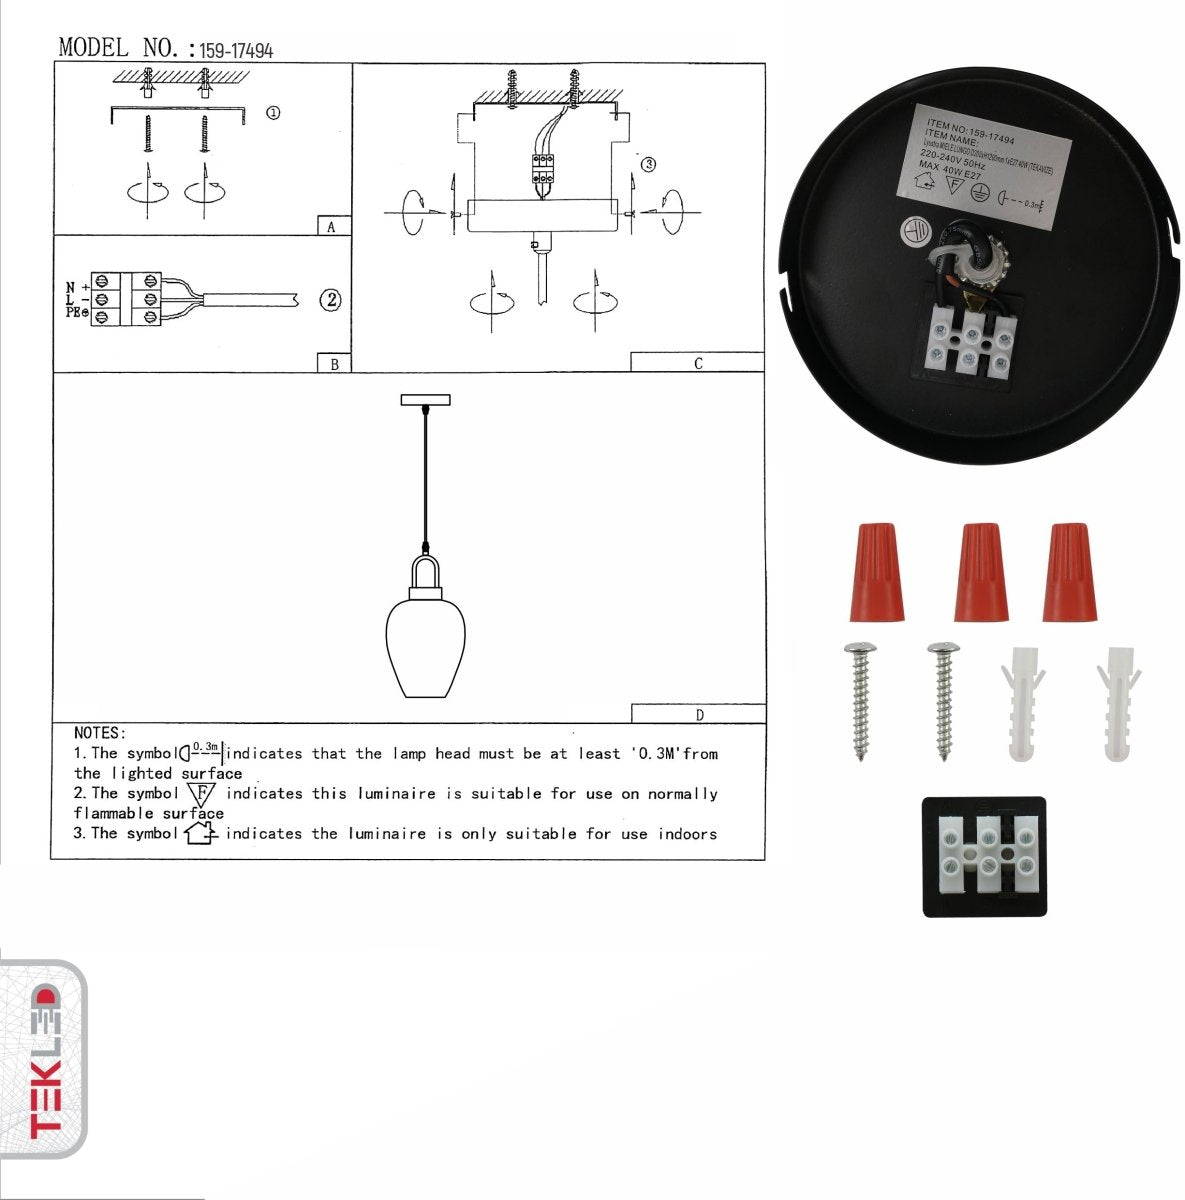 User manual for Miele Lungo Amber Glass Pendant Light with E27 Fitting | TEKLED 159-17494